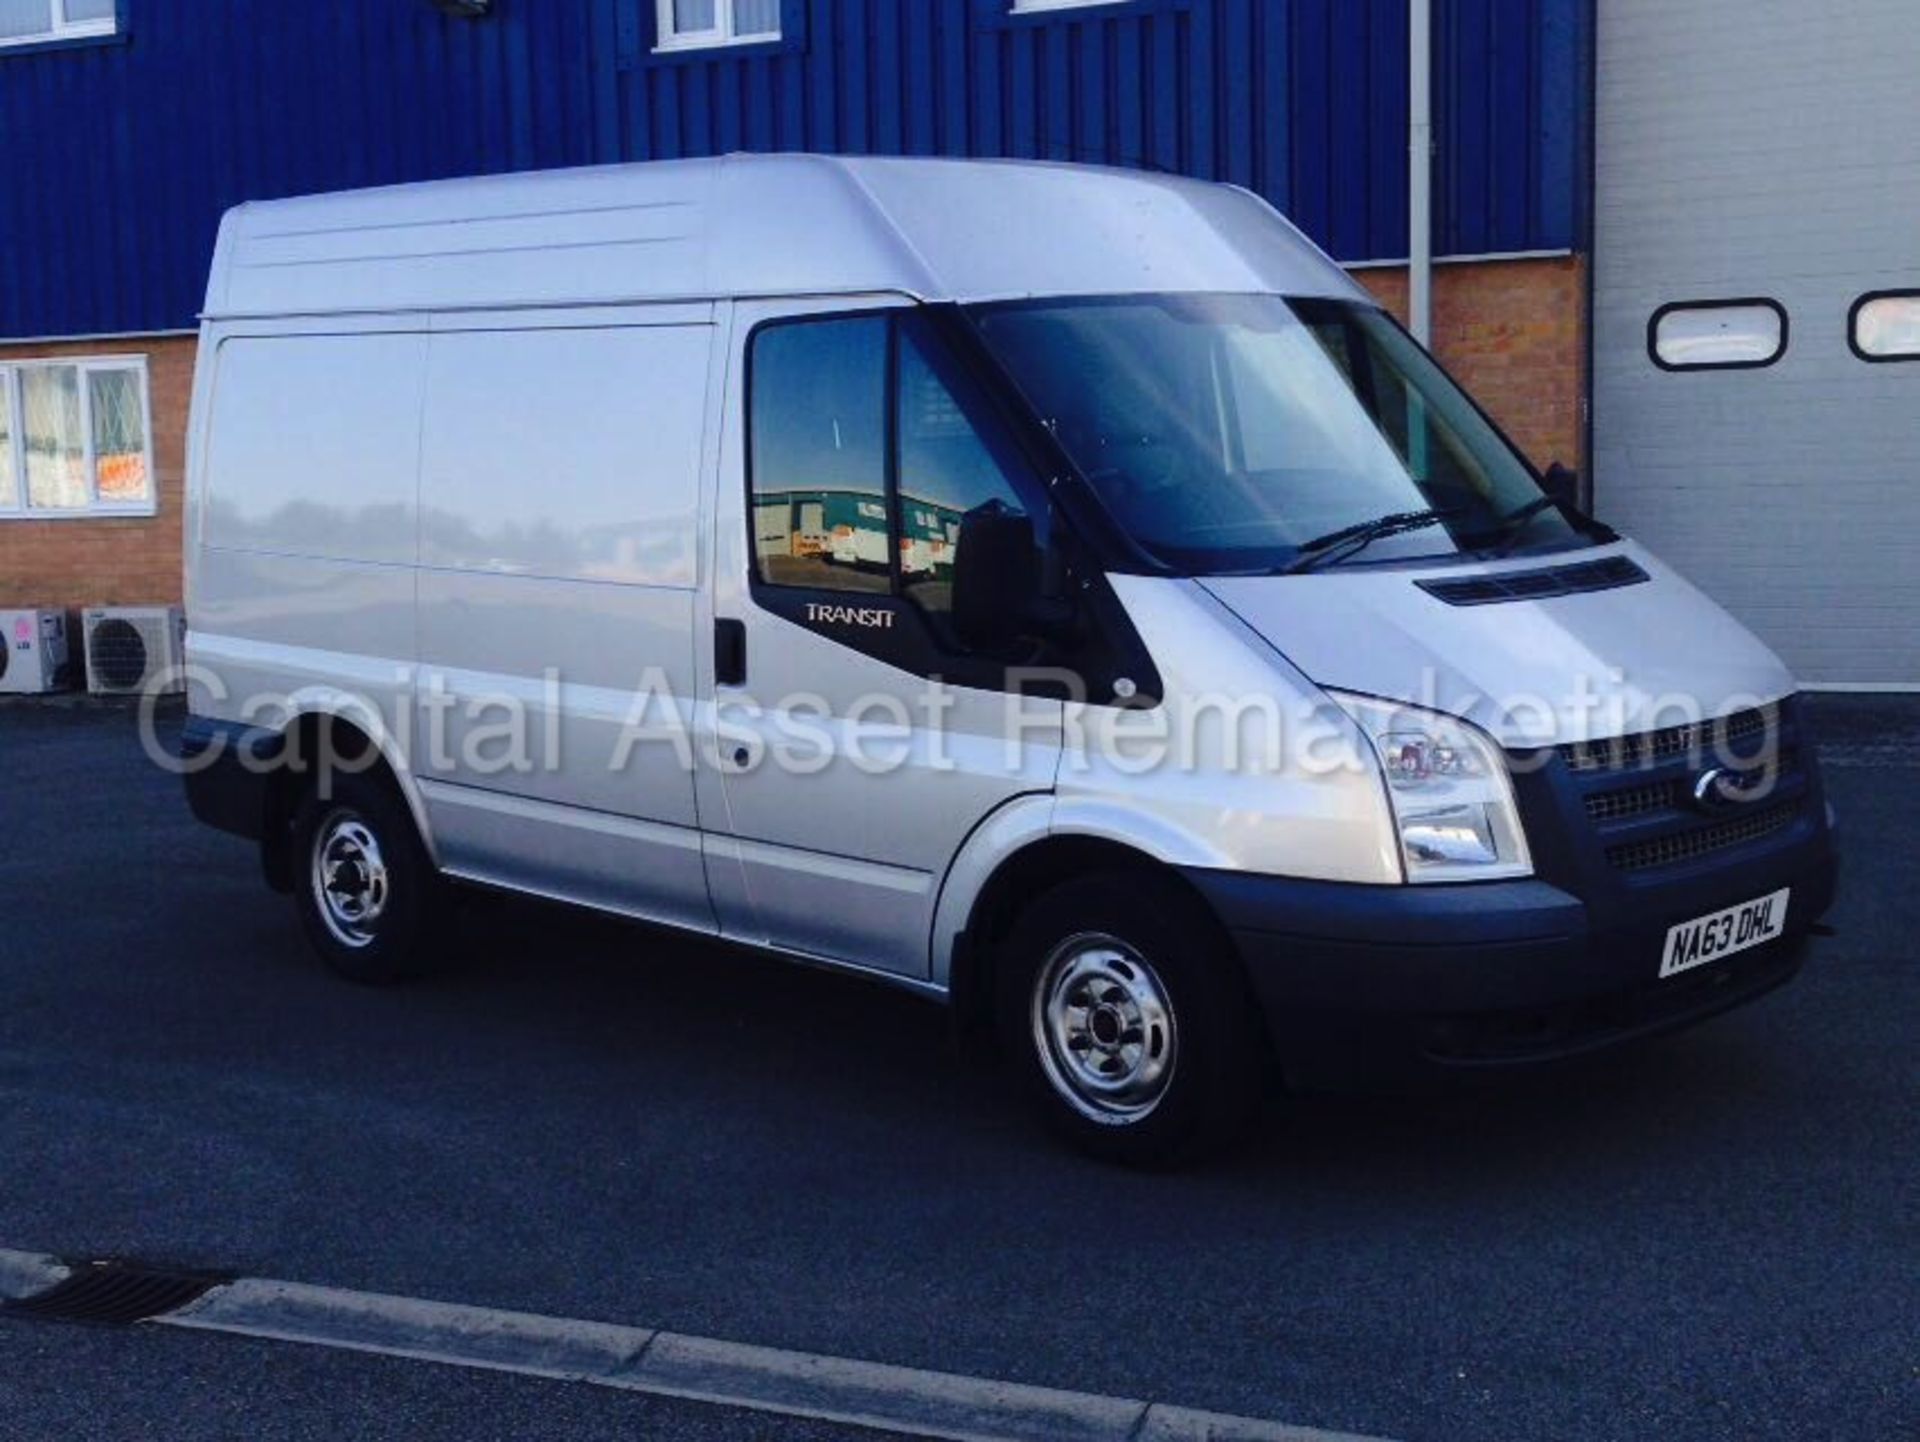 FORD TRANSIT 100 T280 FWD 'SWB HI-ROOF' (2014 MODEL) '2.2 TDCI - 100 PS - 6 SPEED' **AIR CON**